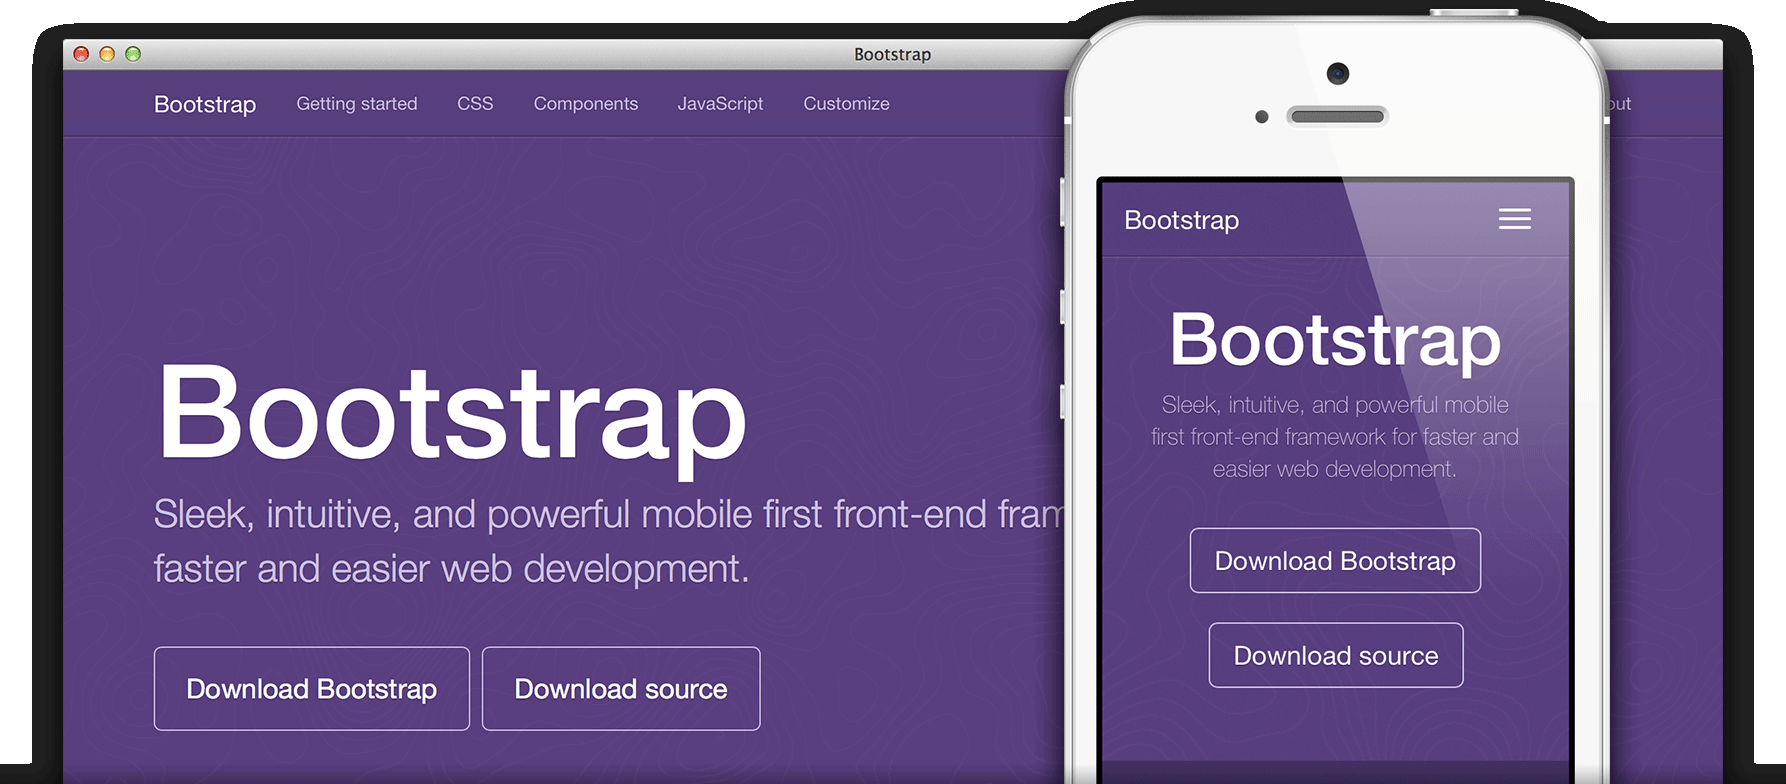 Getting bootstrap. Bootstrap. Bootstrap (фреймворк). Bootstrap Framework. Картинка Bootstrap.